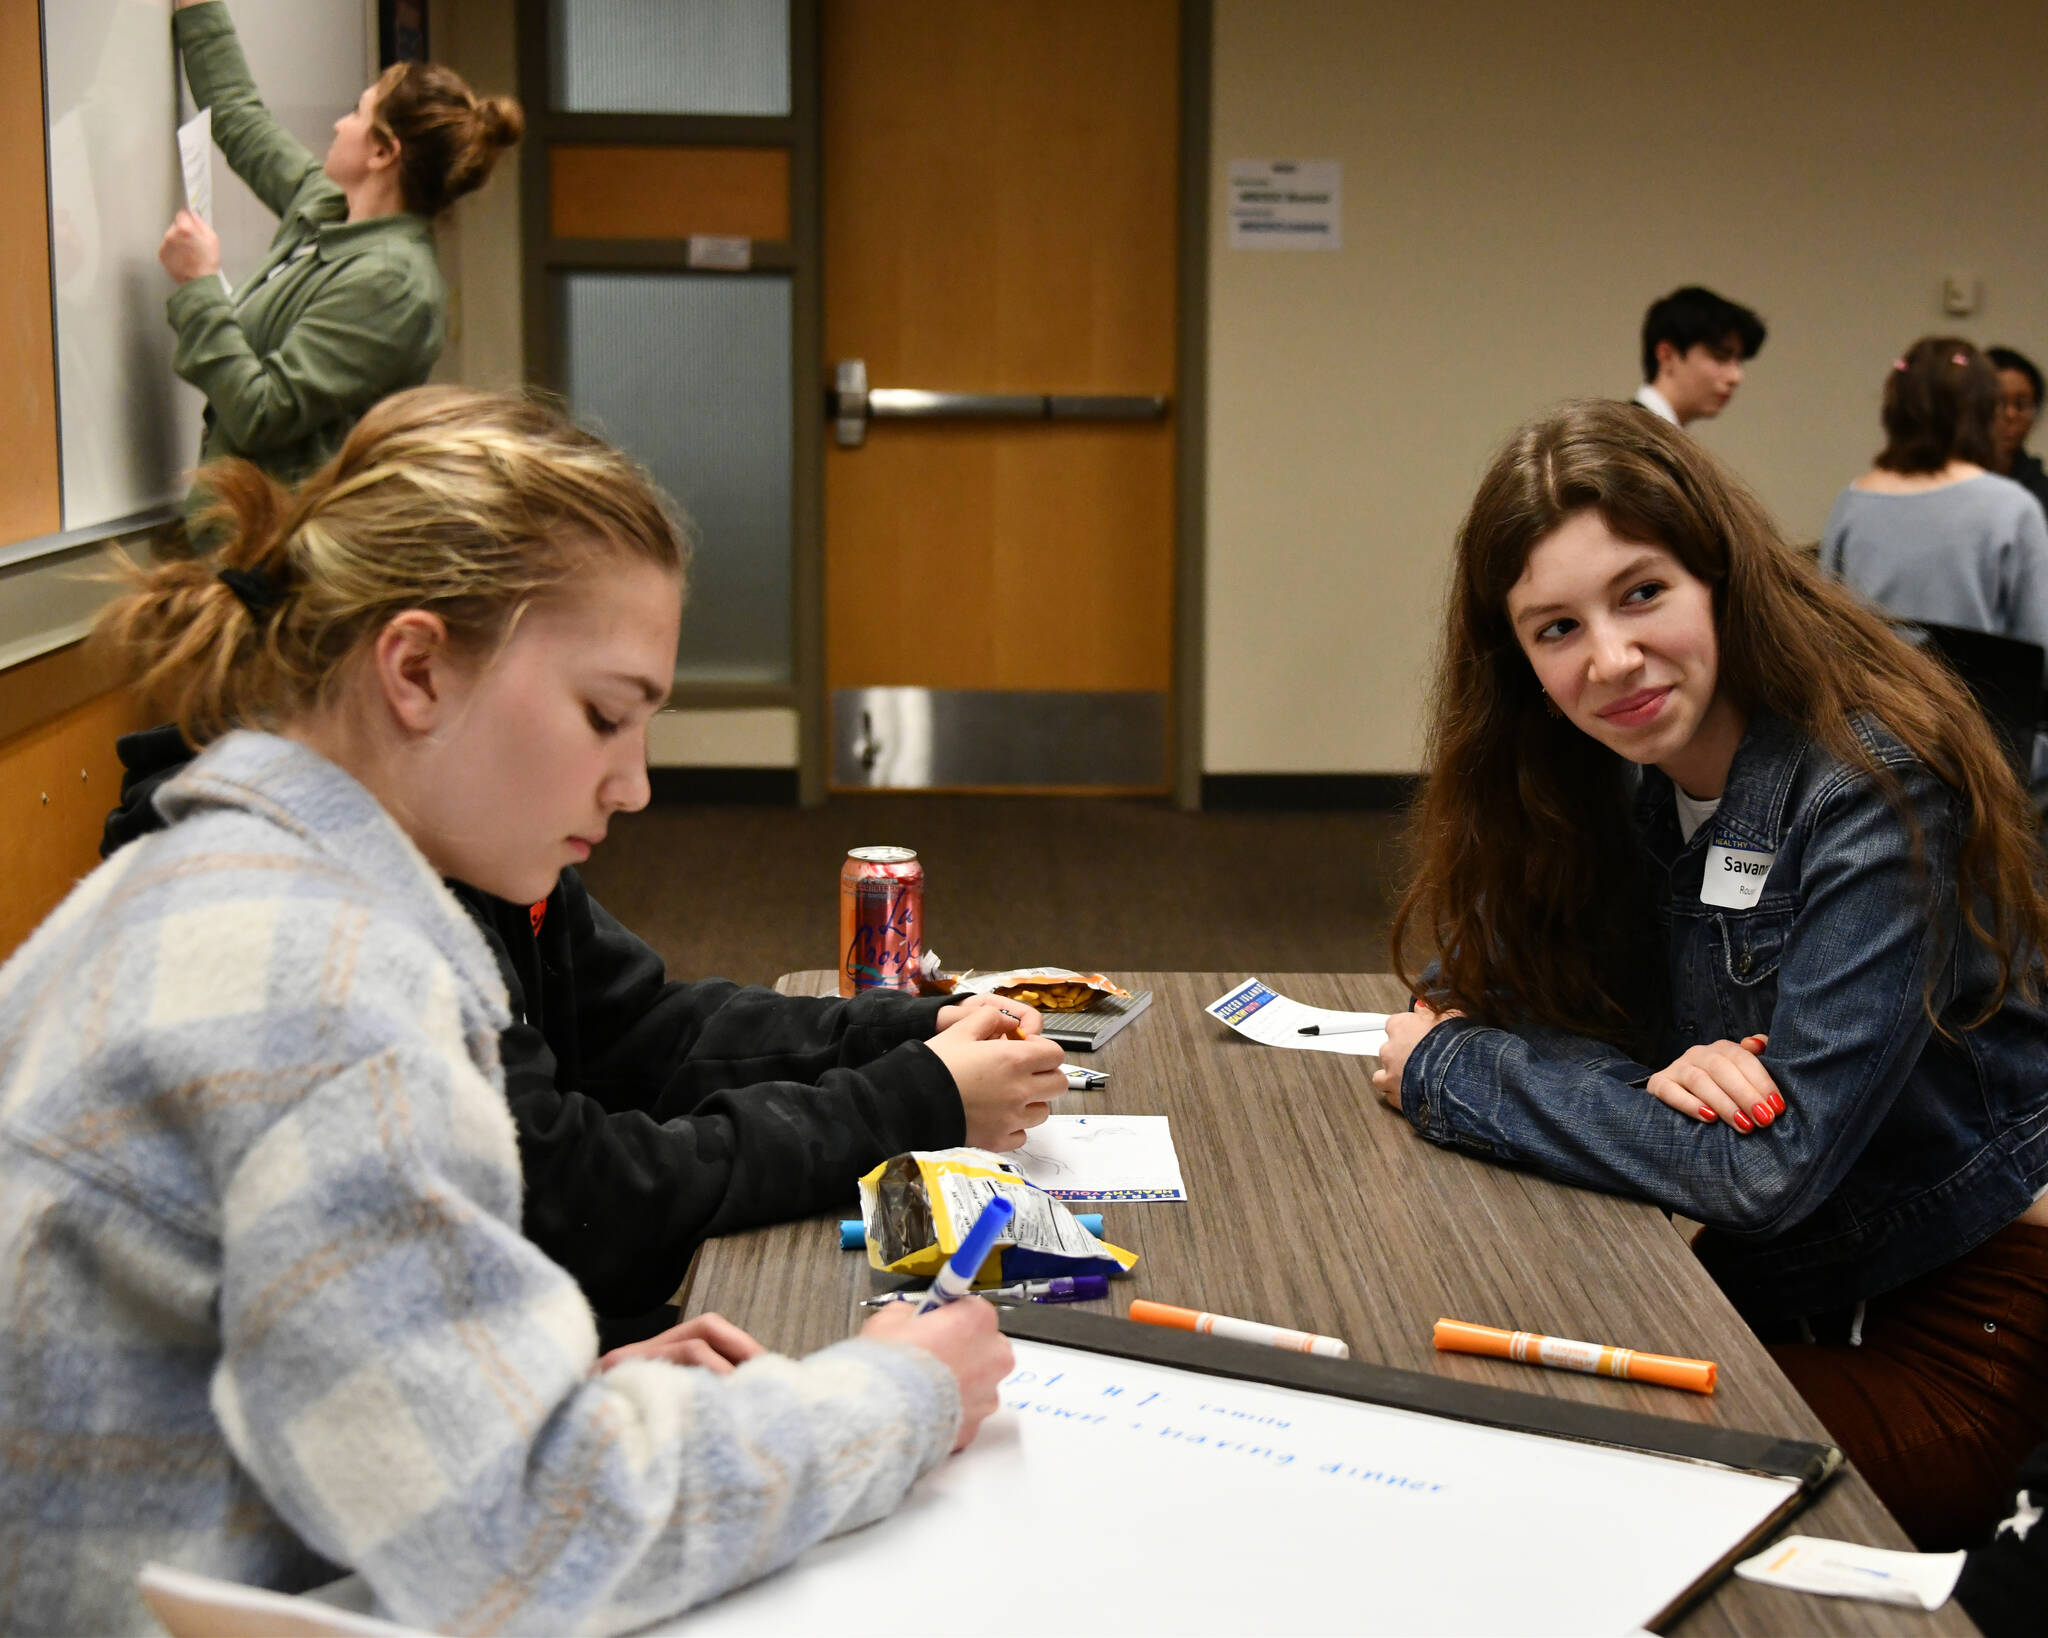 Mercer Island High School’s Savanna Rousell, right, listens to a fellow student while Ina Shapiro, left, takes notes during a breakout session at the MI Healthy Youth Forum on Jan. 31 at the Mercer Island Community and Event Center. Andy Nystrom/ staff photo